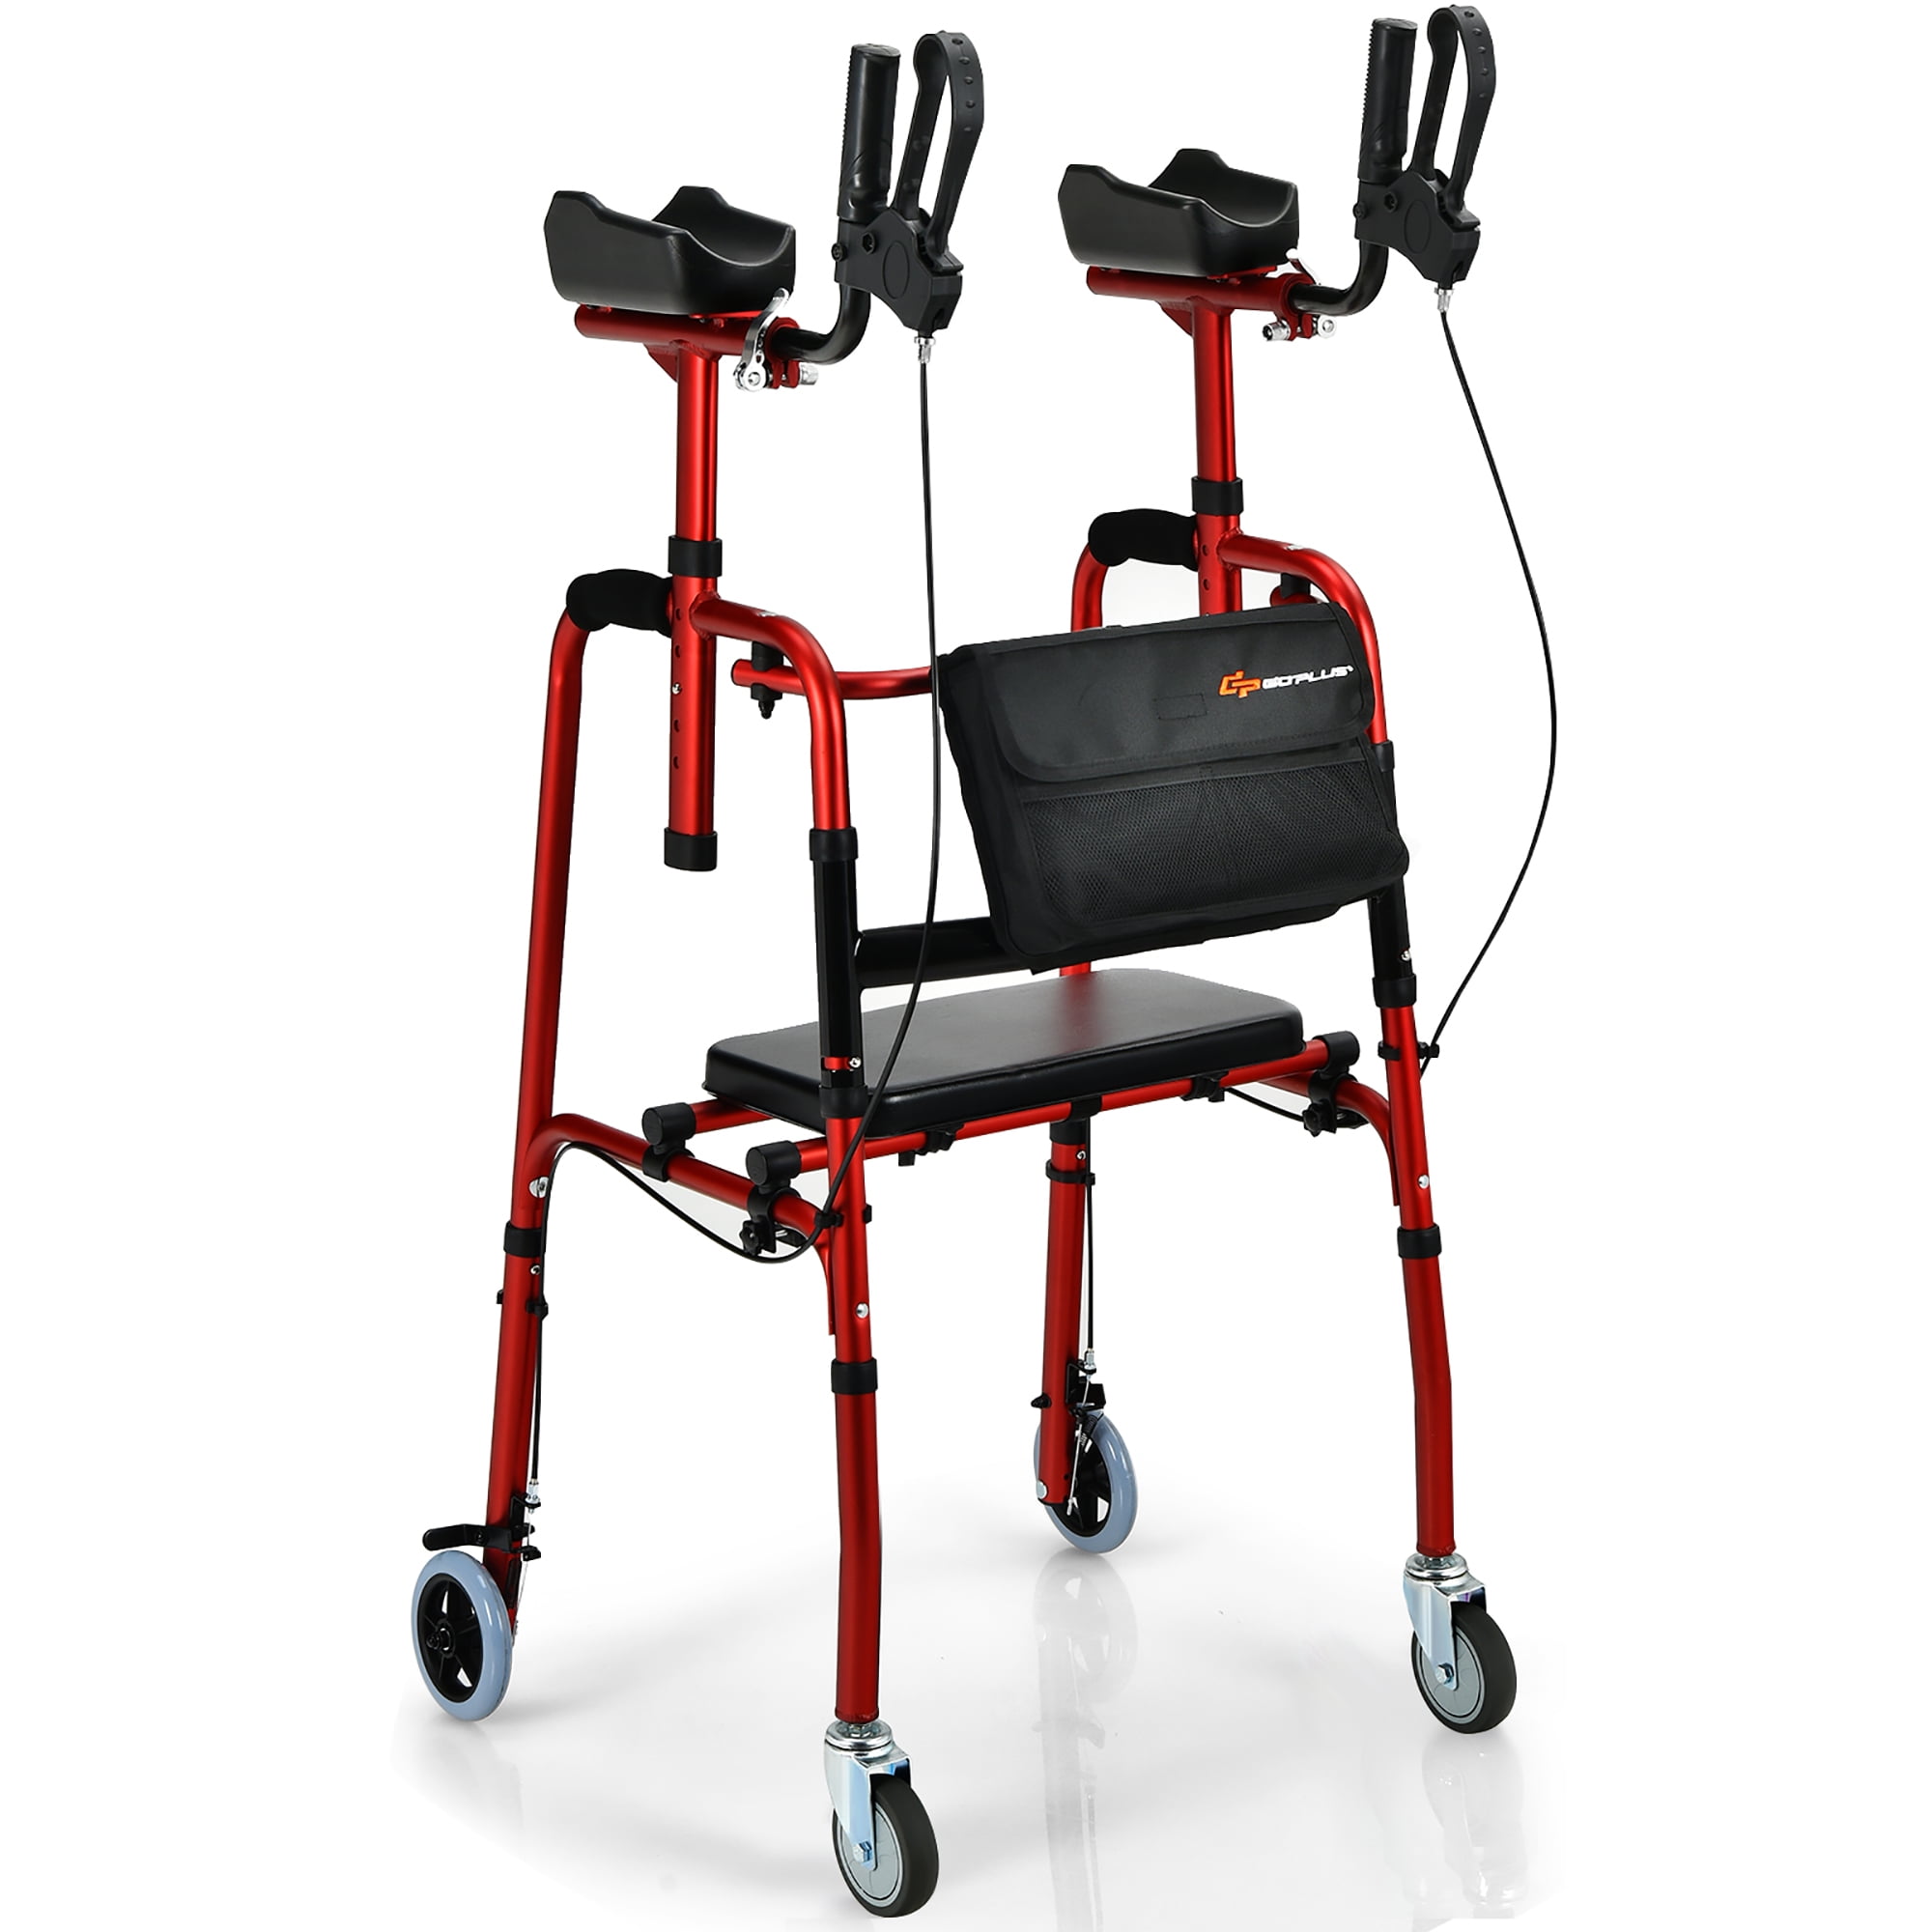 TheLAShop One-Hand Fold Rollator Walker with Footrest Seat